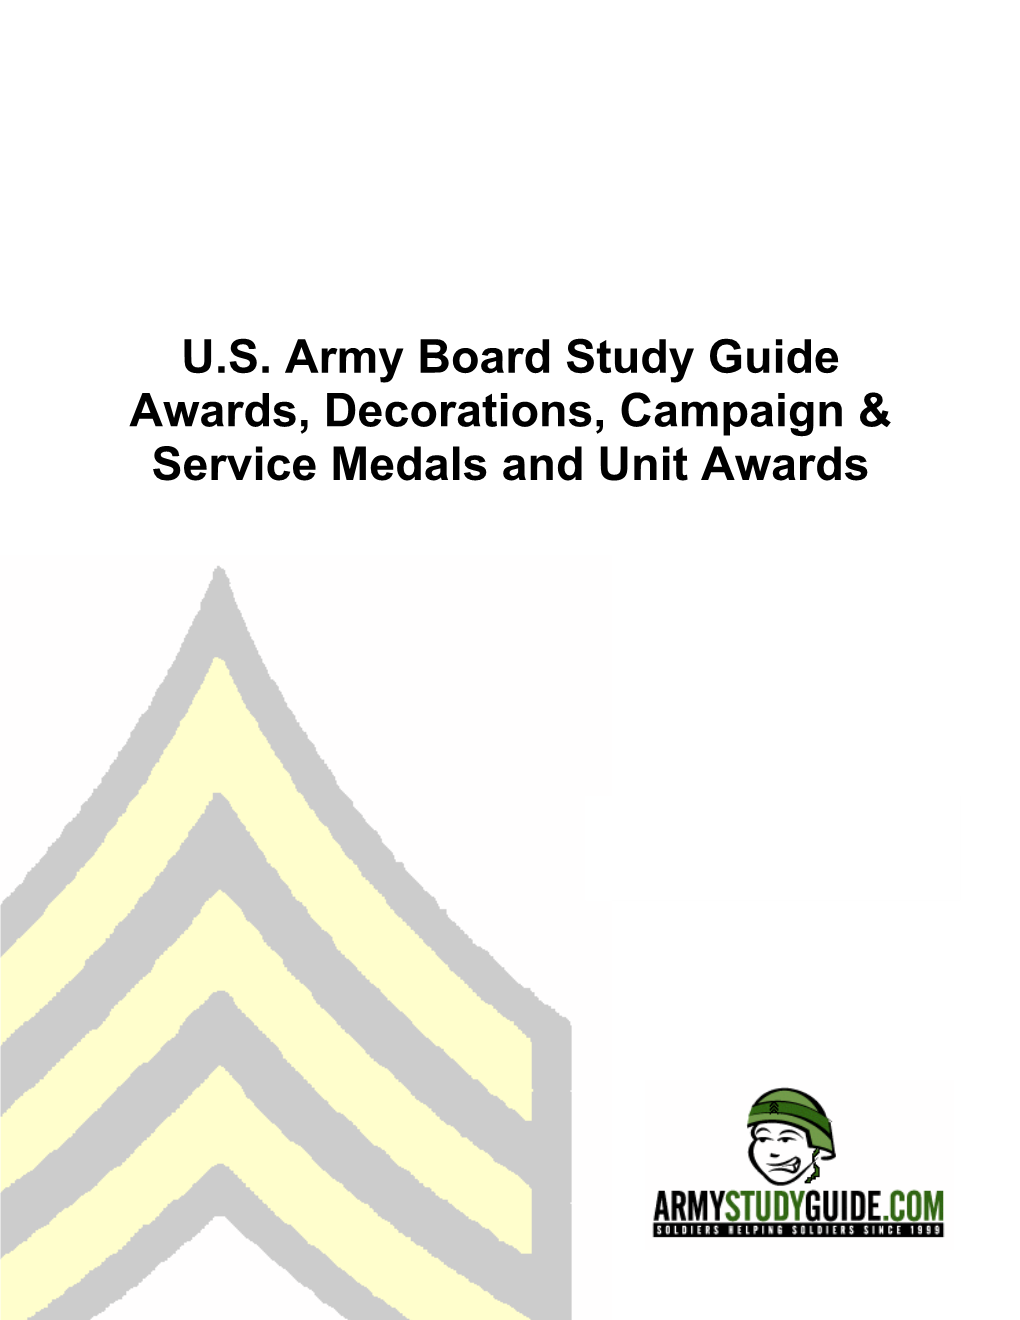 U.S. Army Board Study Guide Awards, Decorations, Campaign & Service Medals and Unit Awards